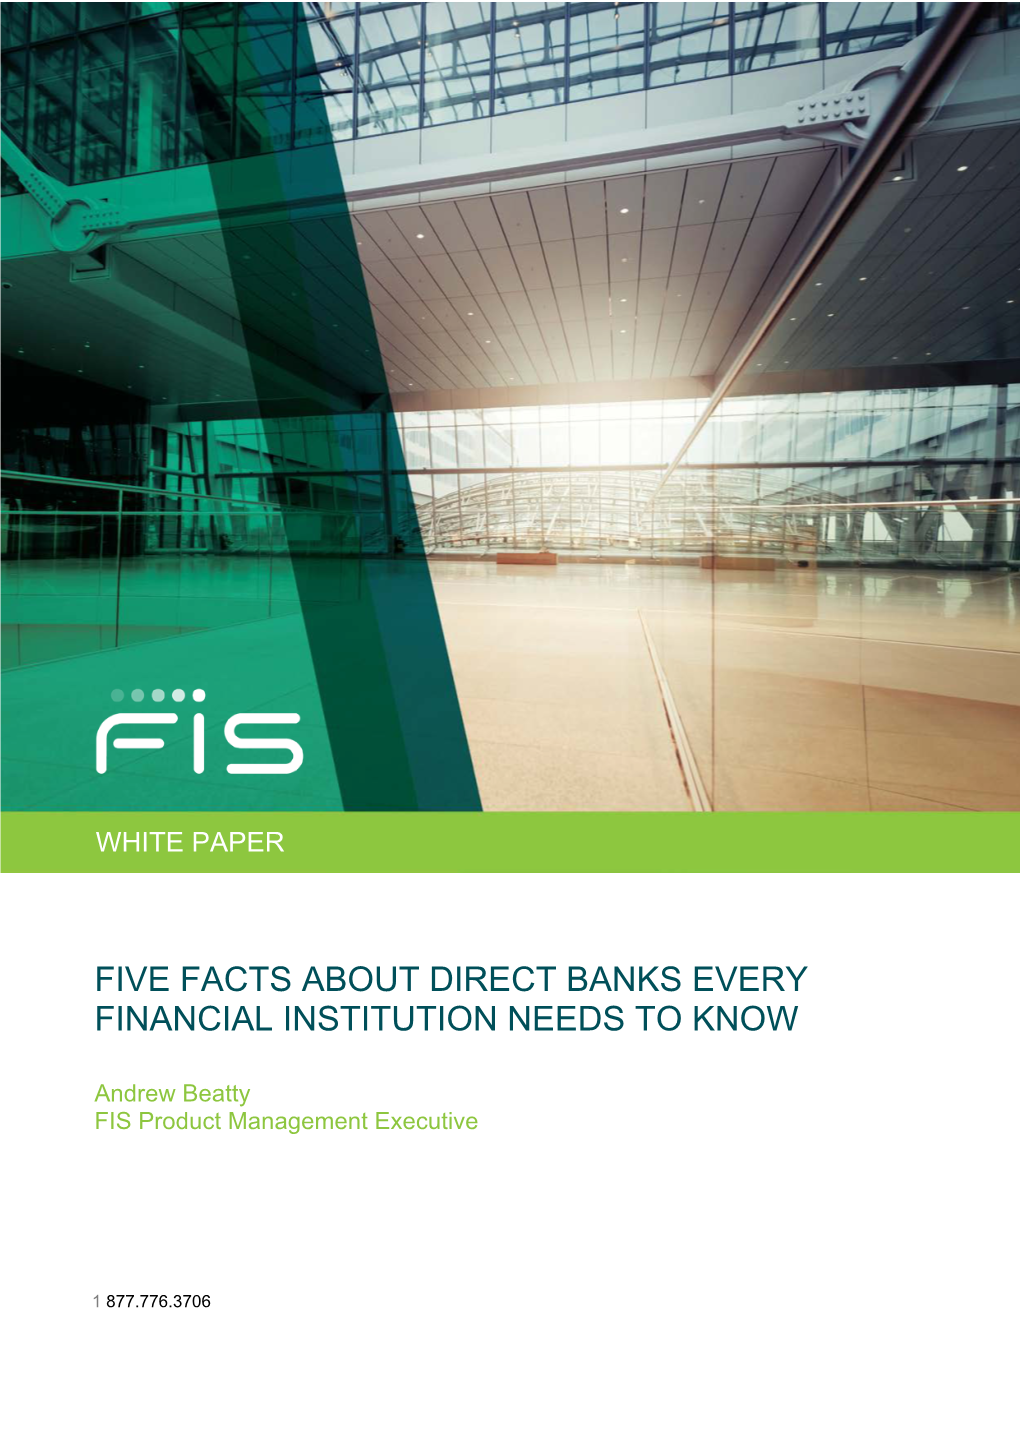 Five Facts About Direct Banks Every Financial Institution Needs to Know